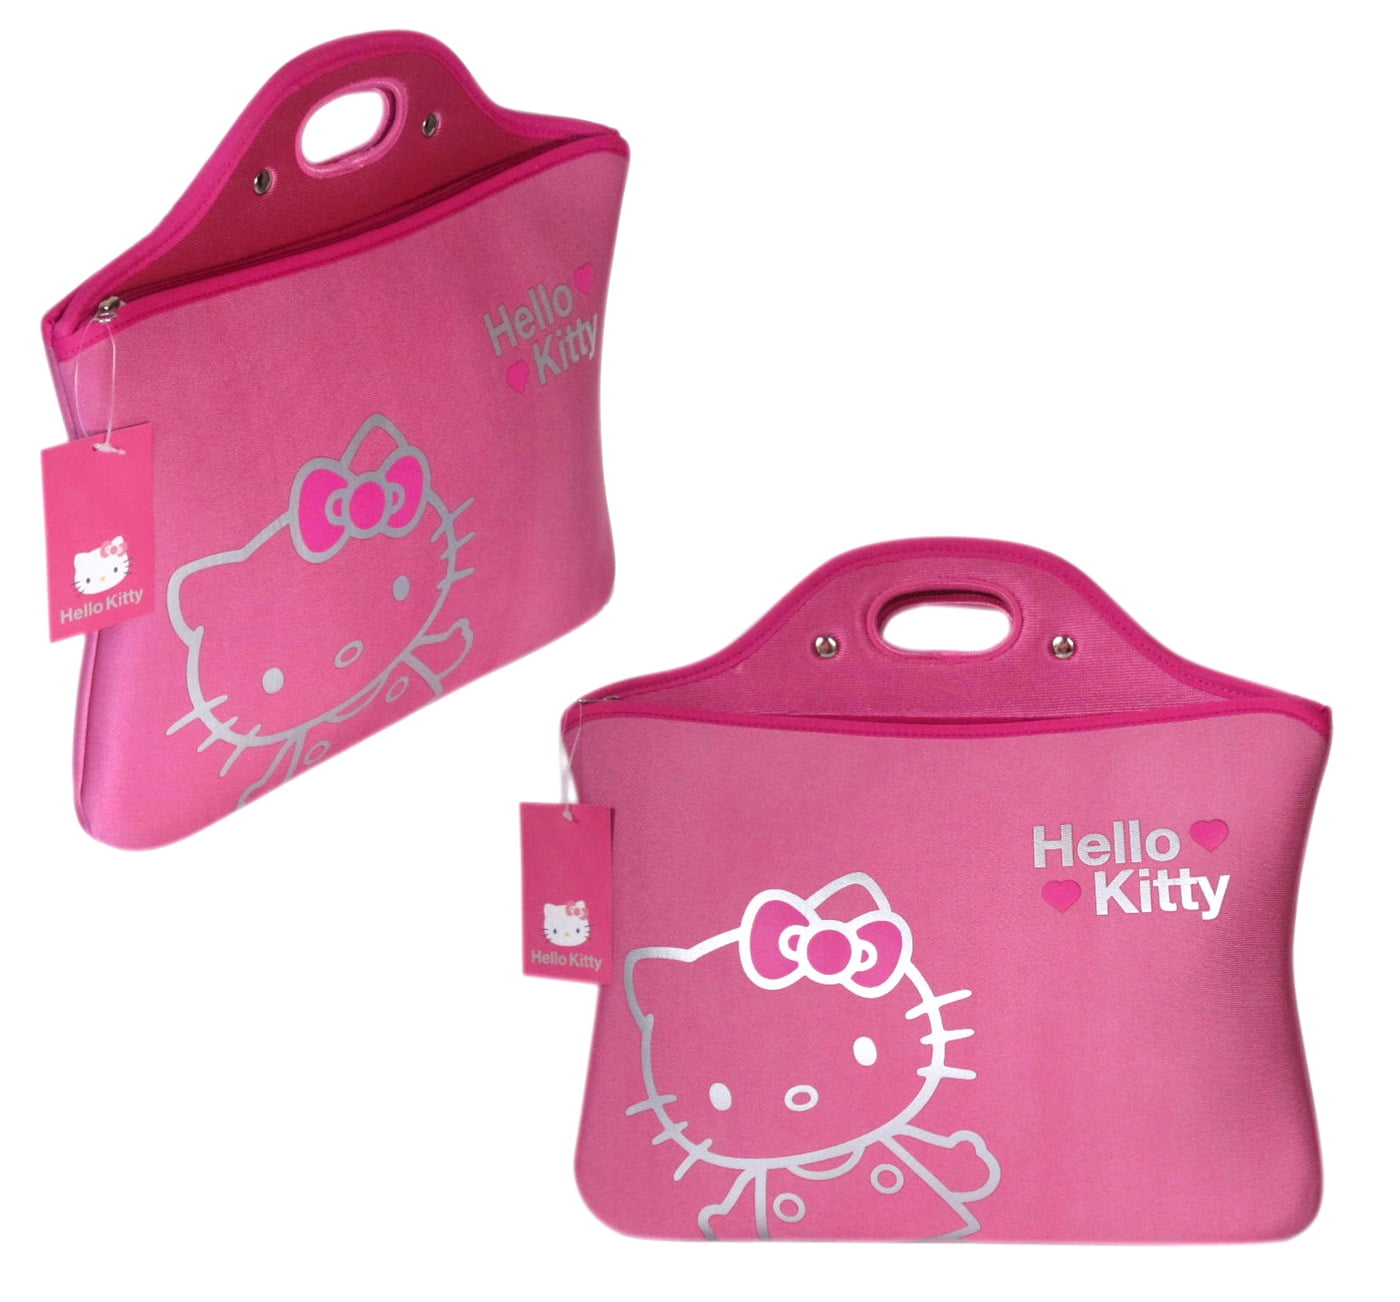 CHLING Hello Kitty Halloweens Laptop Sleeve Bag Compatible 13-15 Inch MacBook Pro/MacBook Air/Notebook 